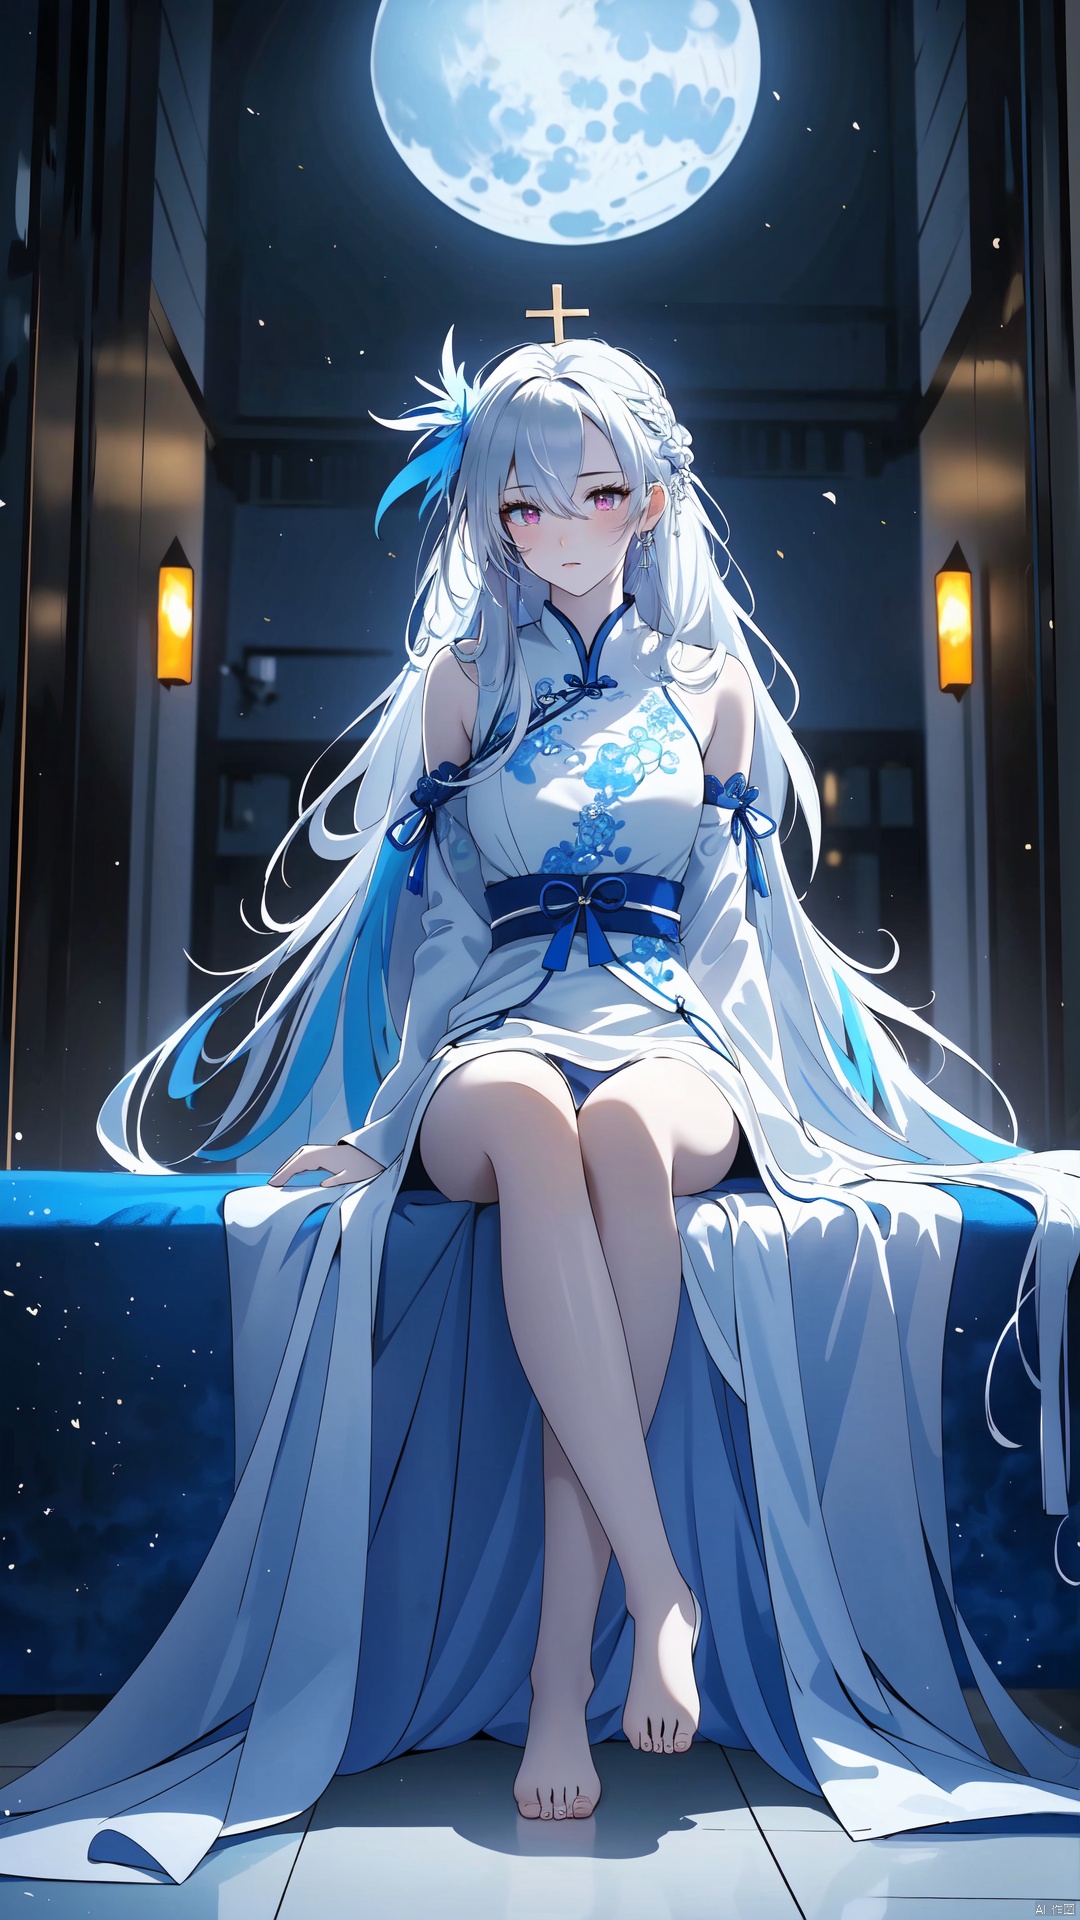  masterpiece, best quality, ((masterpiece)), flat chestbest quality, (highres), solo, flat chest, a girl inside the church with white hair and blue pupil surrounded by (many) glowing (feathers) in cold face, detailed face, night with bright colorful lights whith richly layered clouds and clouded moon in the detailed sky, (a lot of glowing particles),long hair,cool movement, (filigree), delicate and (intricate) hair, ((sliver)) and (broken) body, blue streaked hair, full body, depth of field, sitting on a (blue star), bishoujo,full body,no shoes,foot, Chinese dragons_ink and wash styles_misty clouds_ancient paintings_flames, long yedress and white blindfold